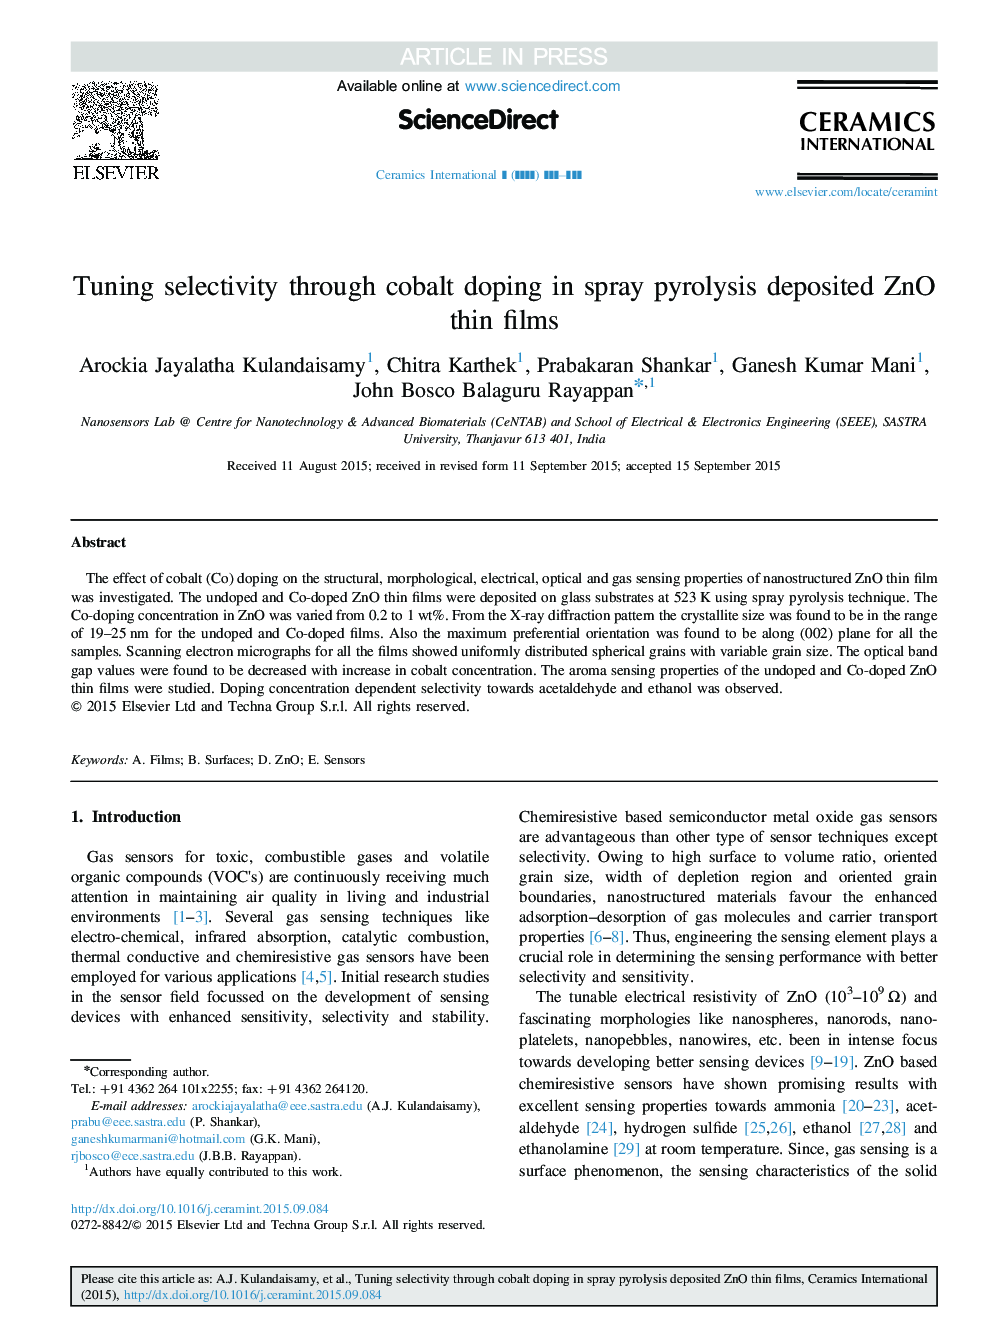 Tuning selectivity through cobalt doping in spray pyrolysis deposited ZnO thin films